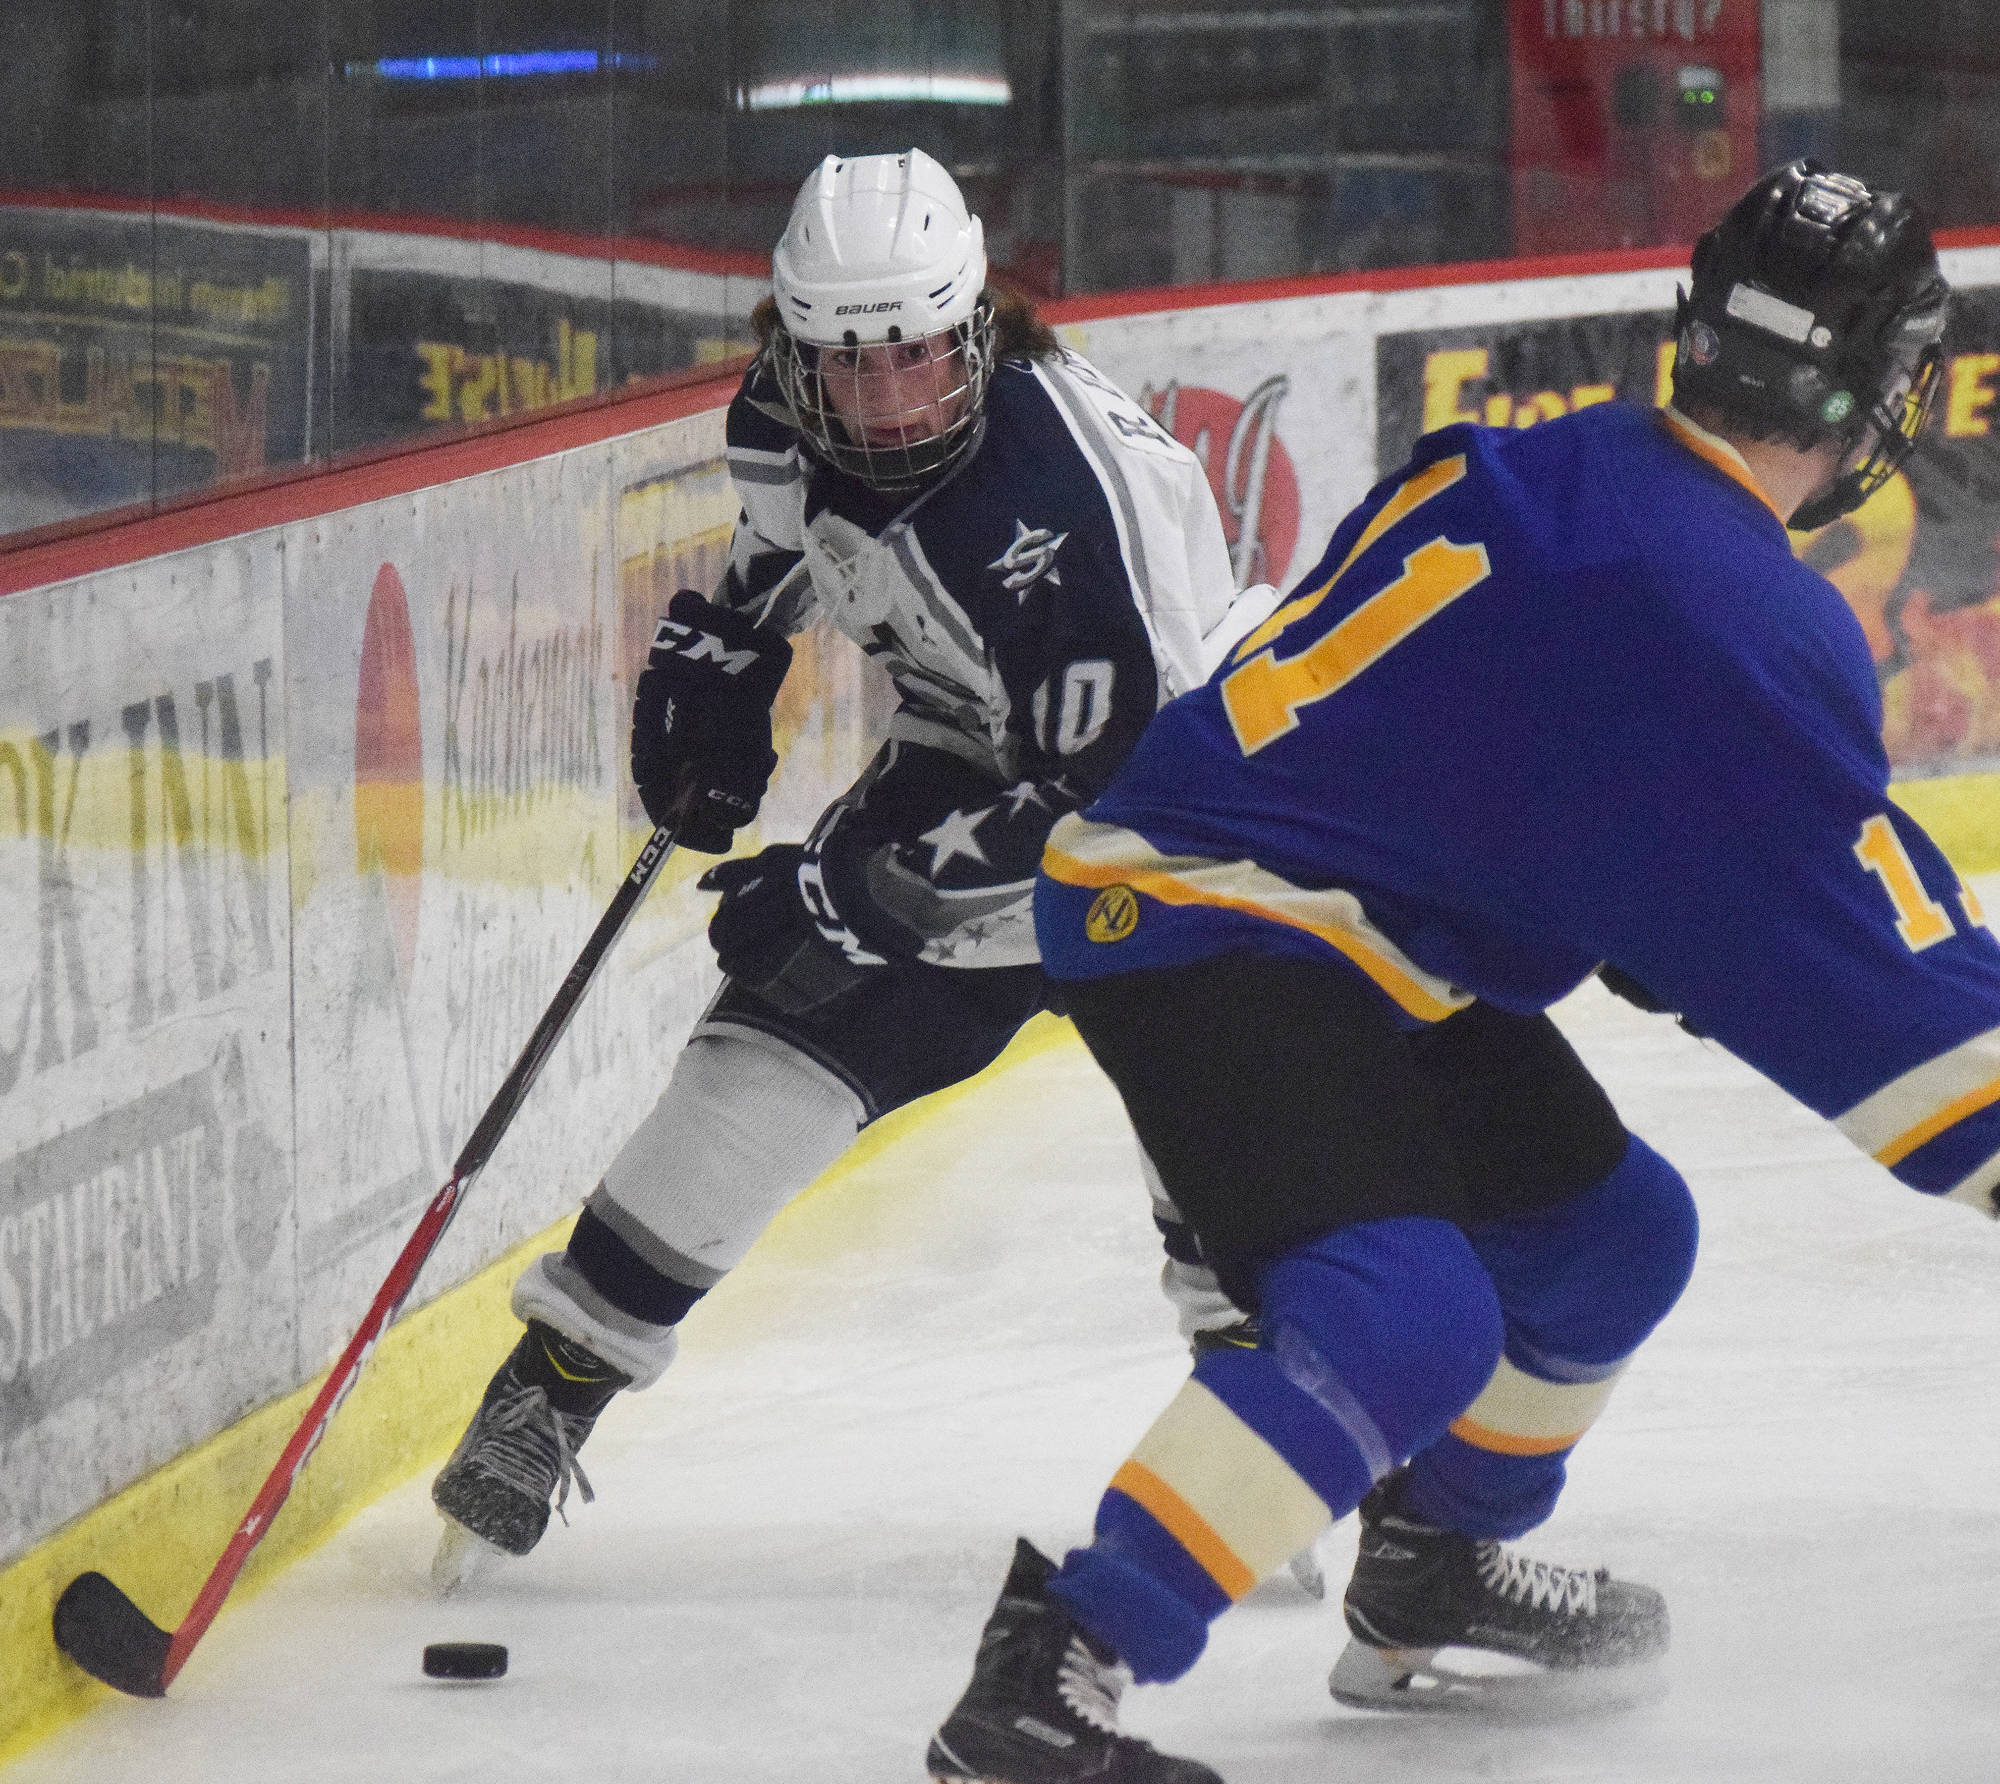 Soldotna’s Braxton Urban (10) slips the puck by Monroe Catholic’s Riley Ott Thursday at the Peninsula Ice Challenge at the Soldotna Regional Sports Complex. (Photo by Joey Klecka/Peninsula Clarion)